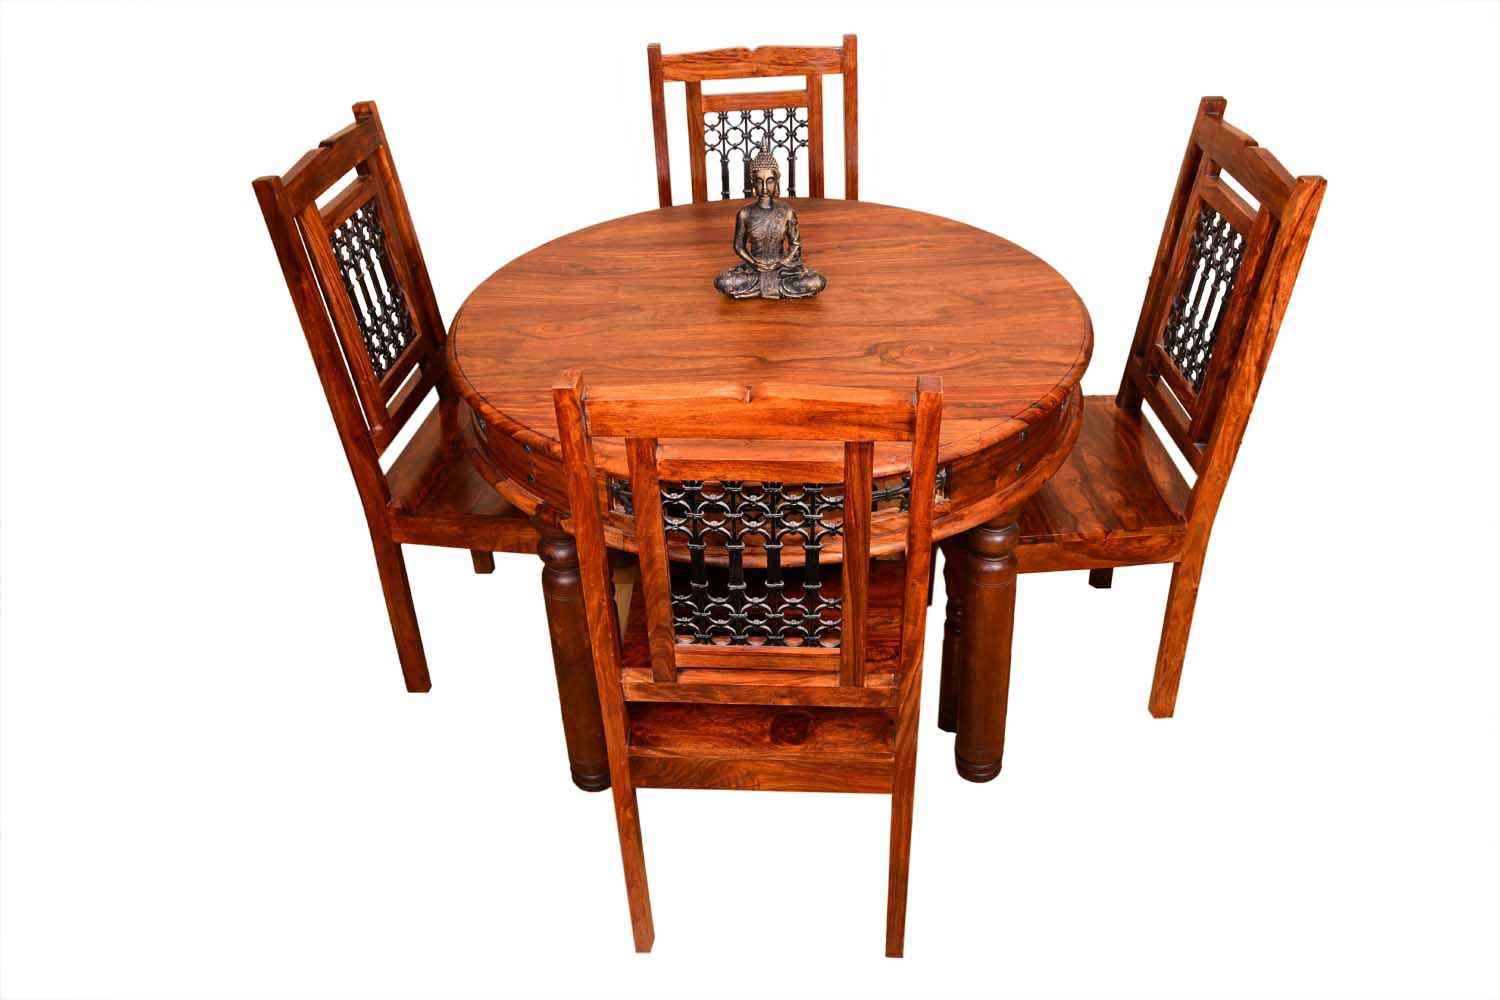 4 Seater Dining Room Table Set